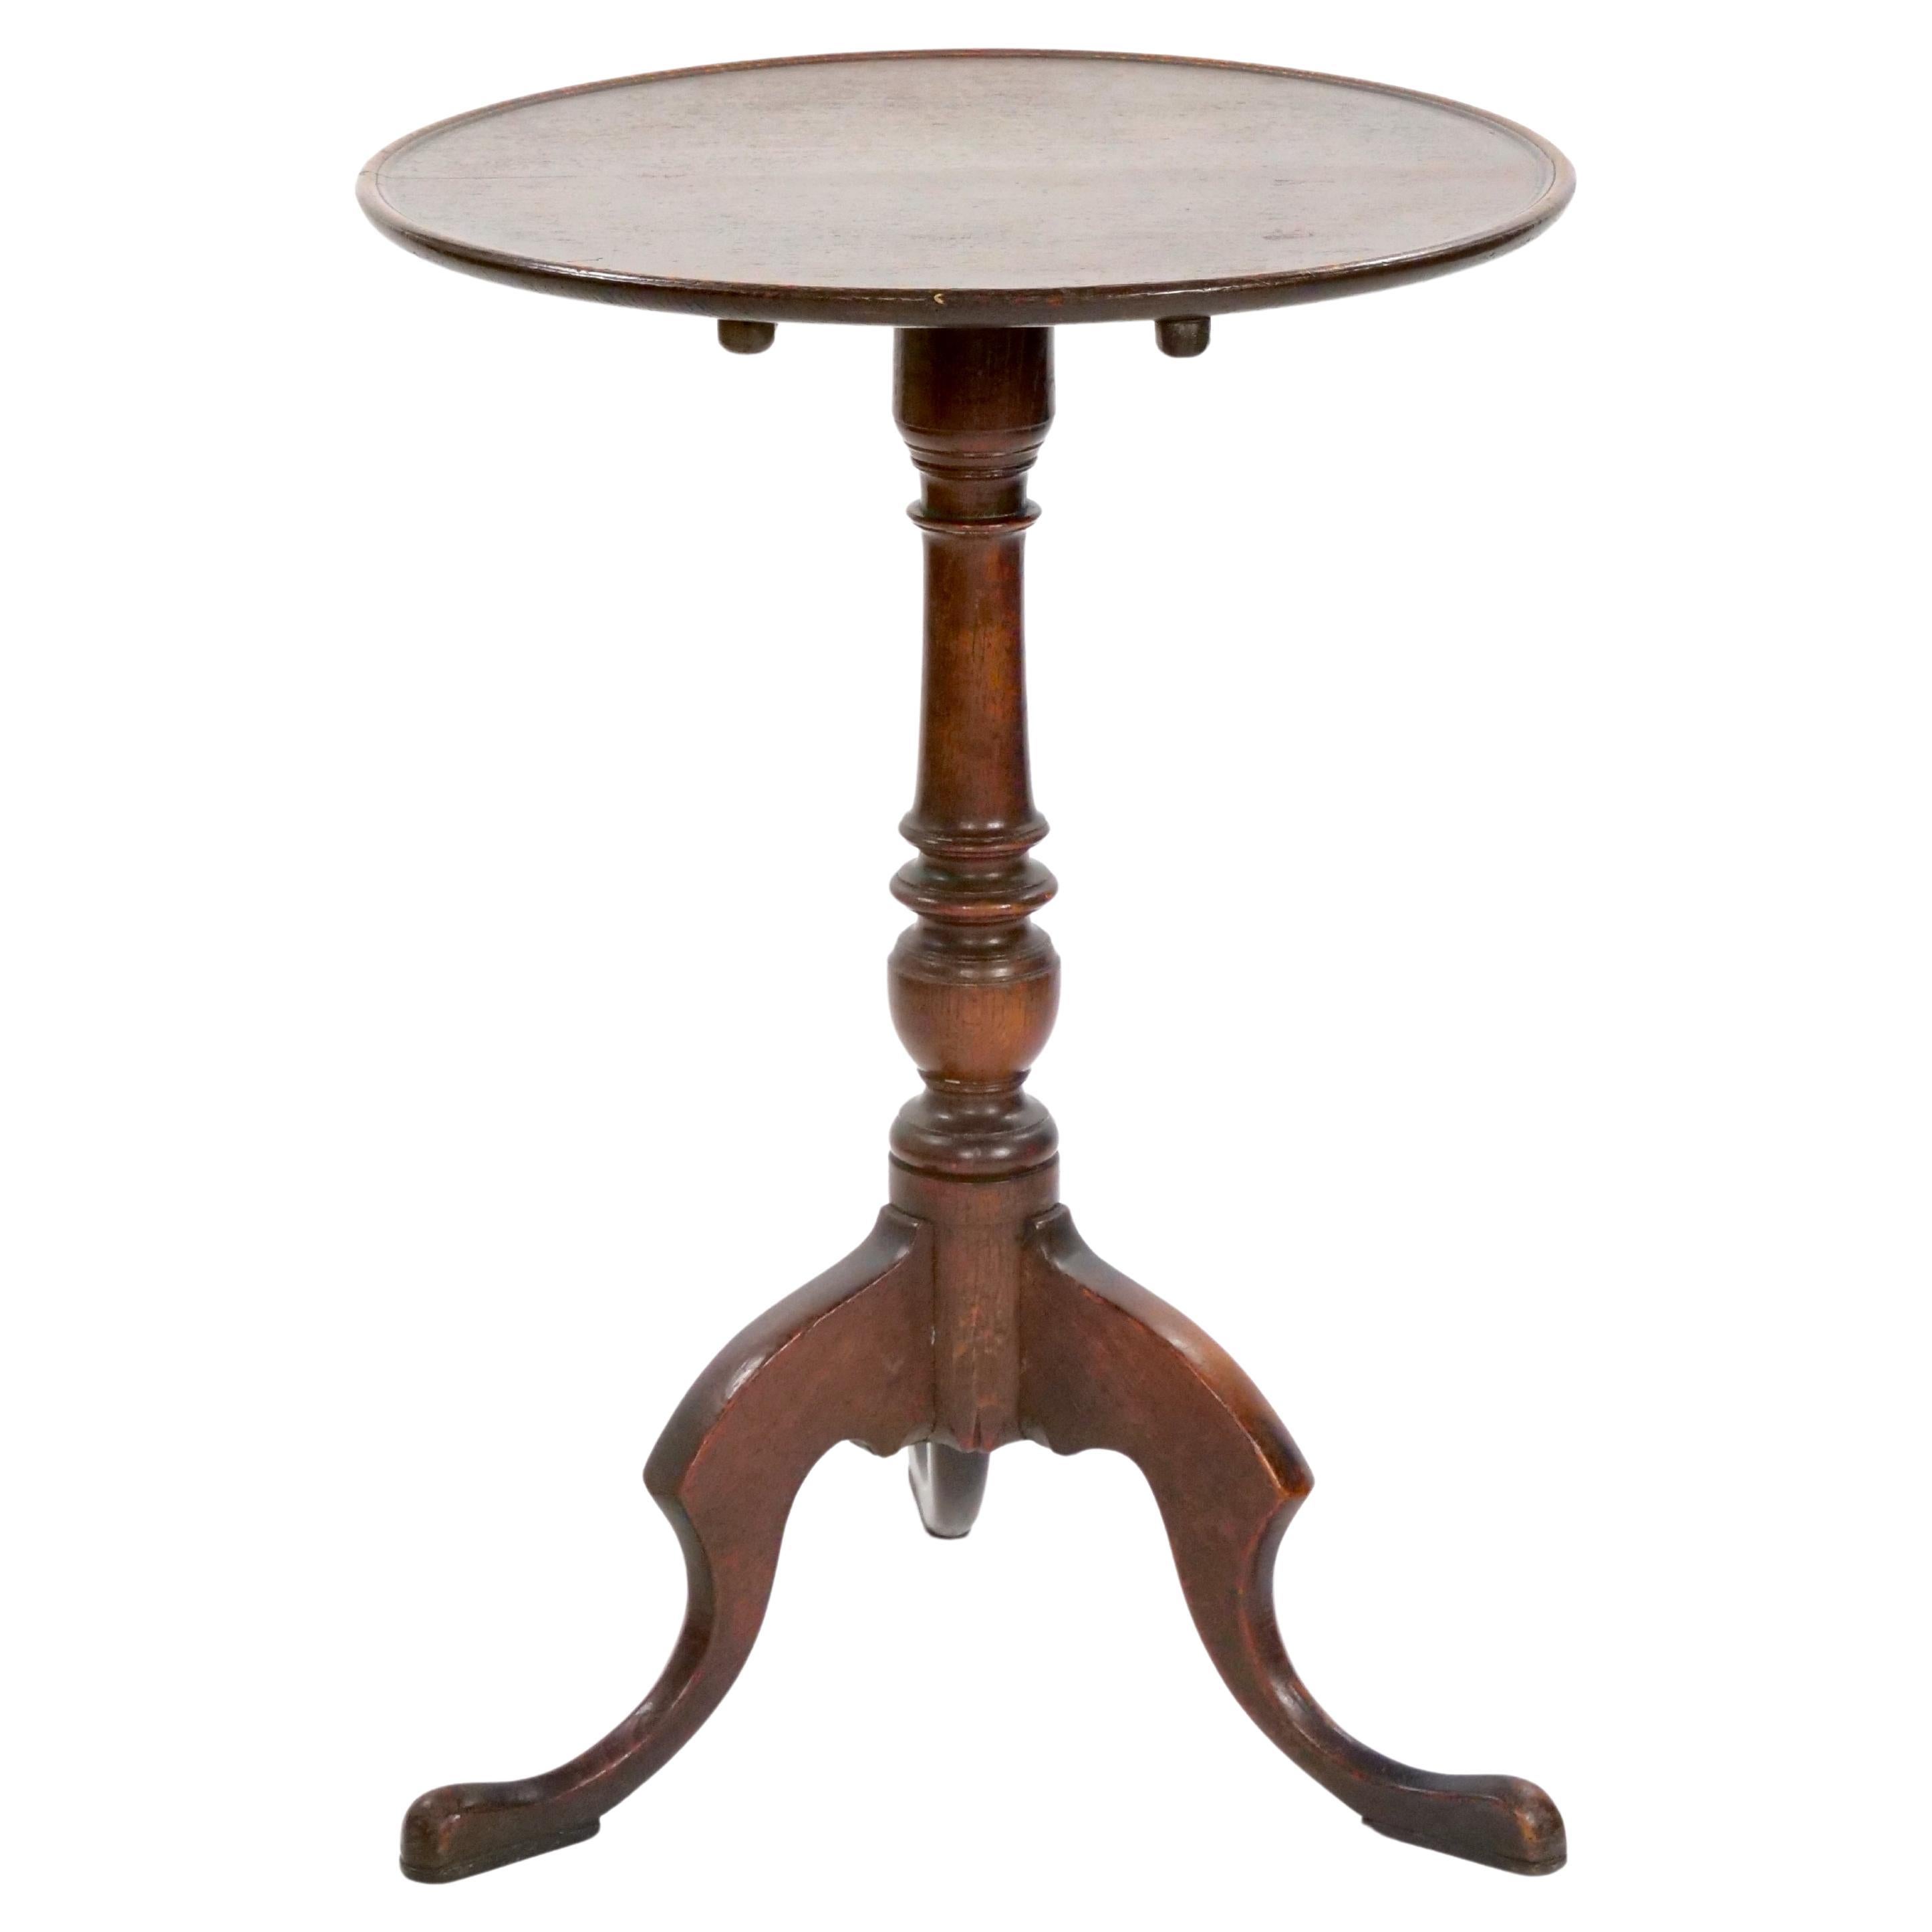 19th Century Victorian Mahogany Tripod Pedestal Candle Stand